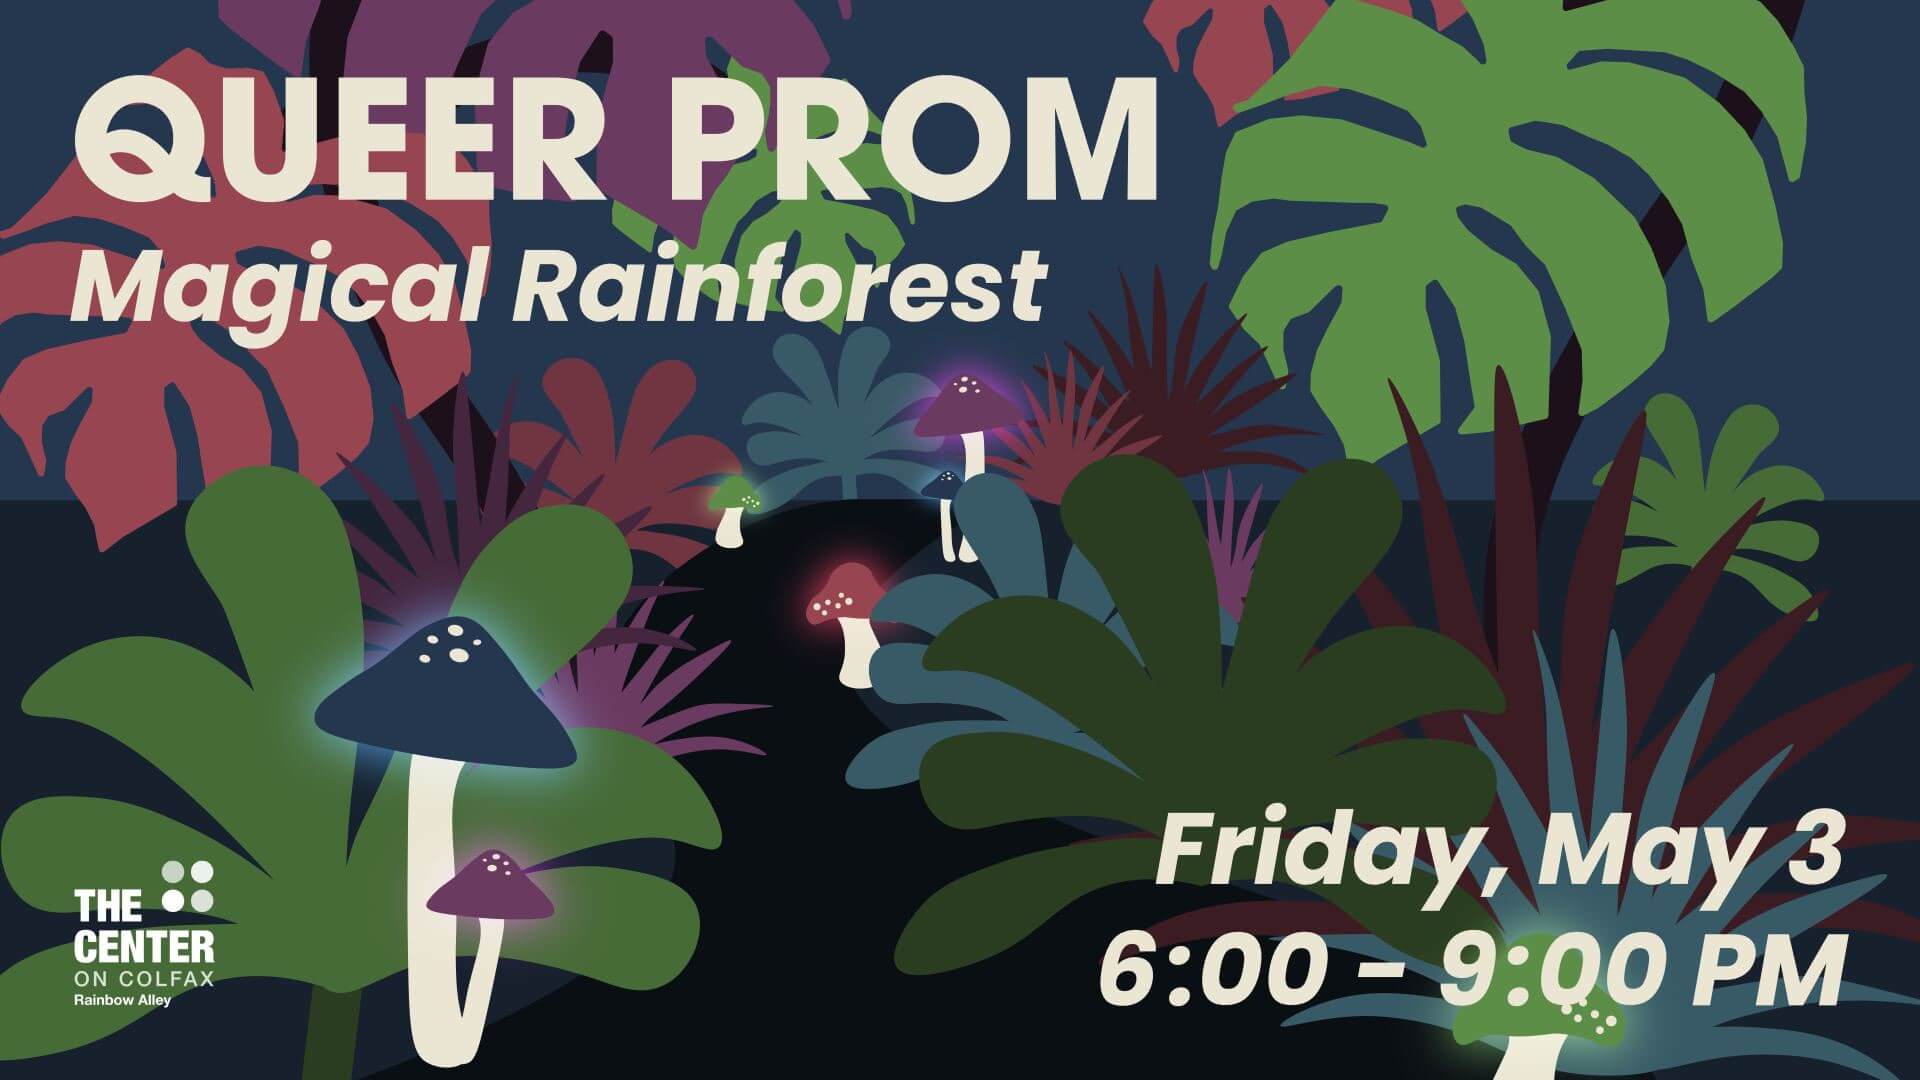 "Queer Prom: Magical Rainforest - Friday, May 3, 6:00 - 9:00 PM" text overlayed over a scene of a purple, green, and pink rainforest scene